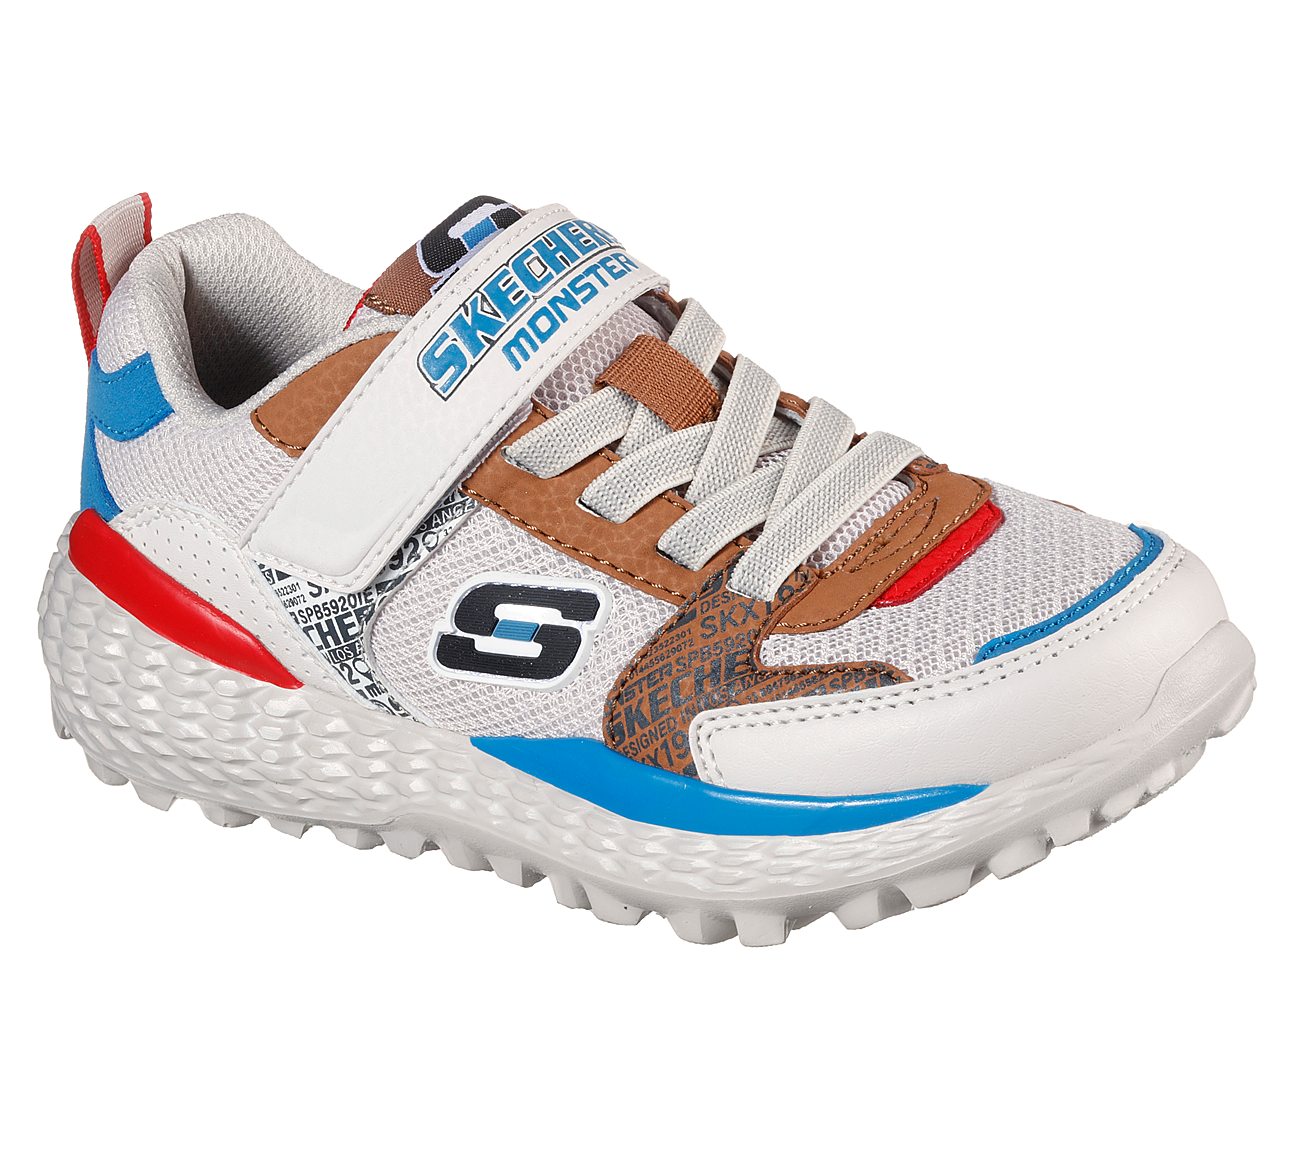 SKECHERS MONSTER-KROVON, TAUPE/MULTI Footwear Lateral View